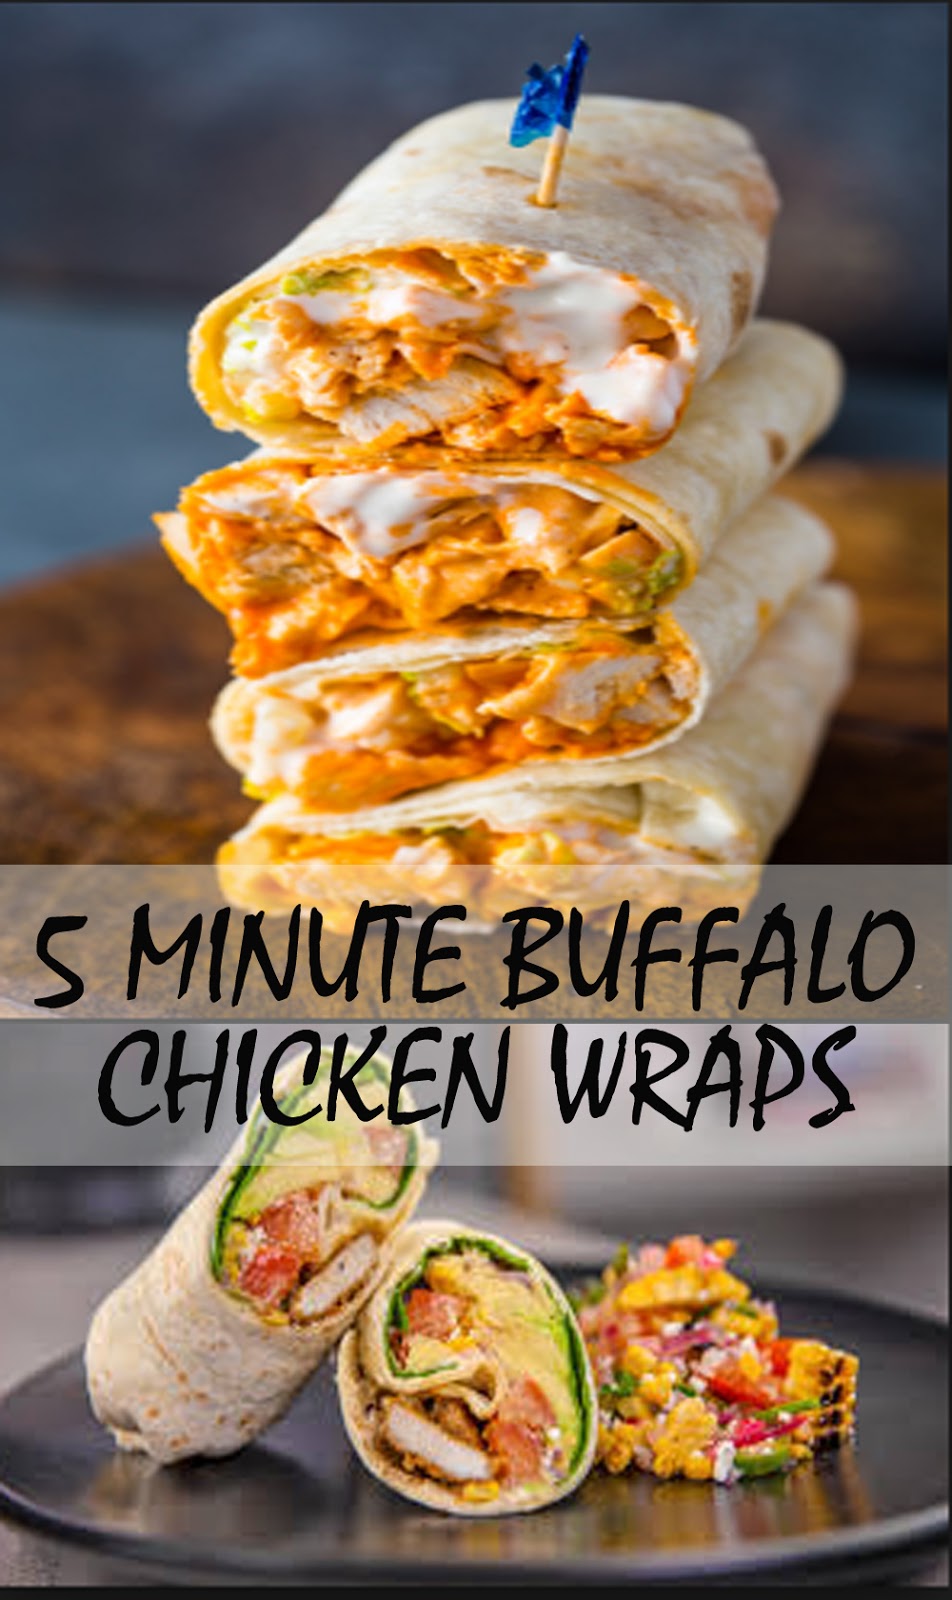 5 MINUTE BUFFALO CHICKEN WRAPS - food and health